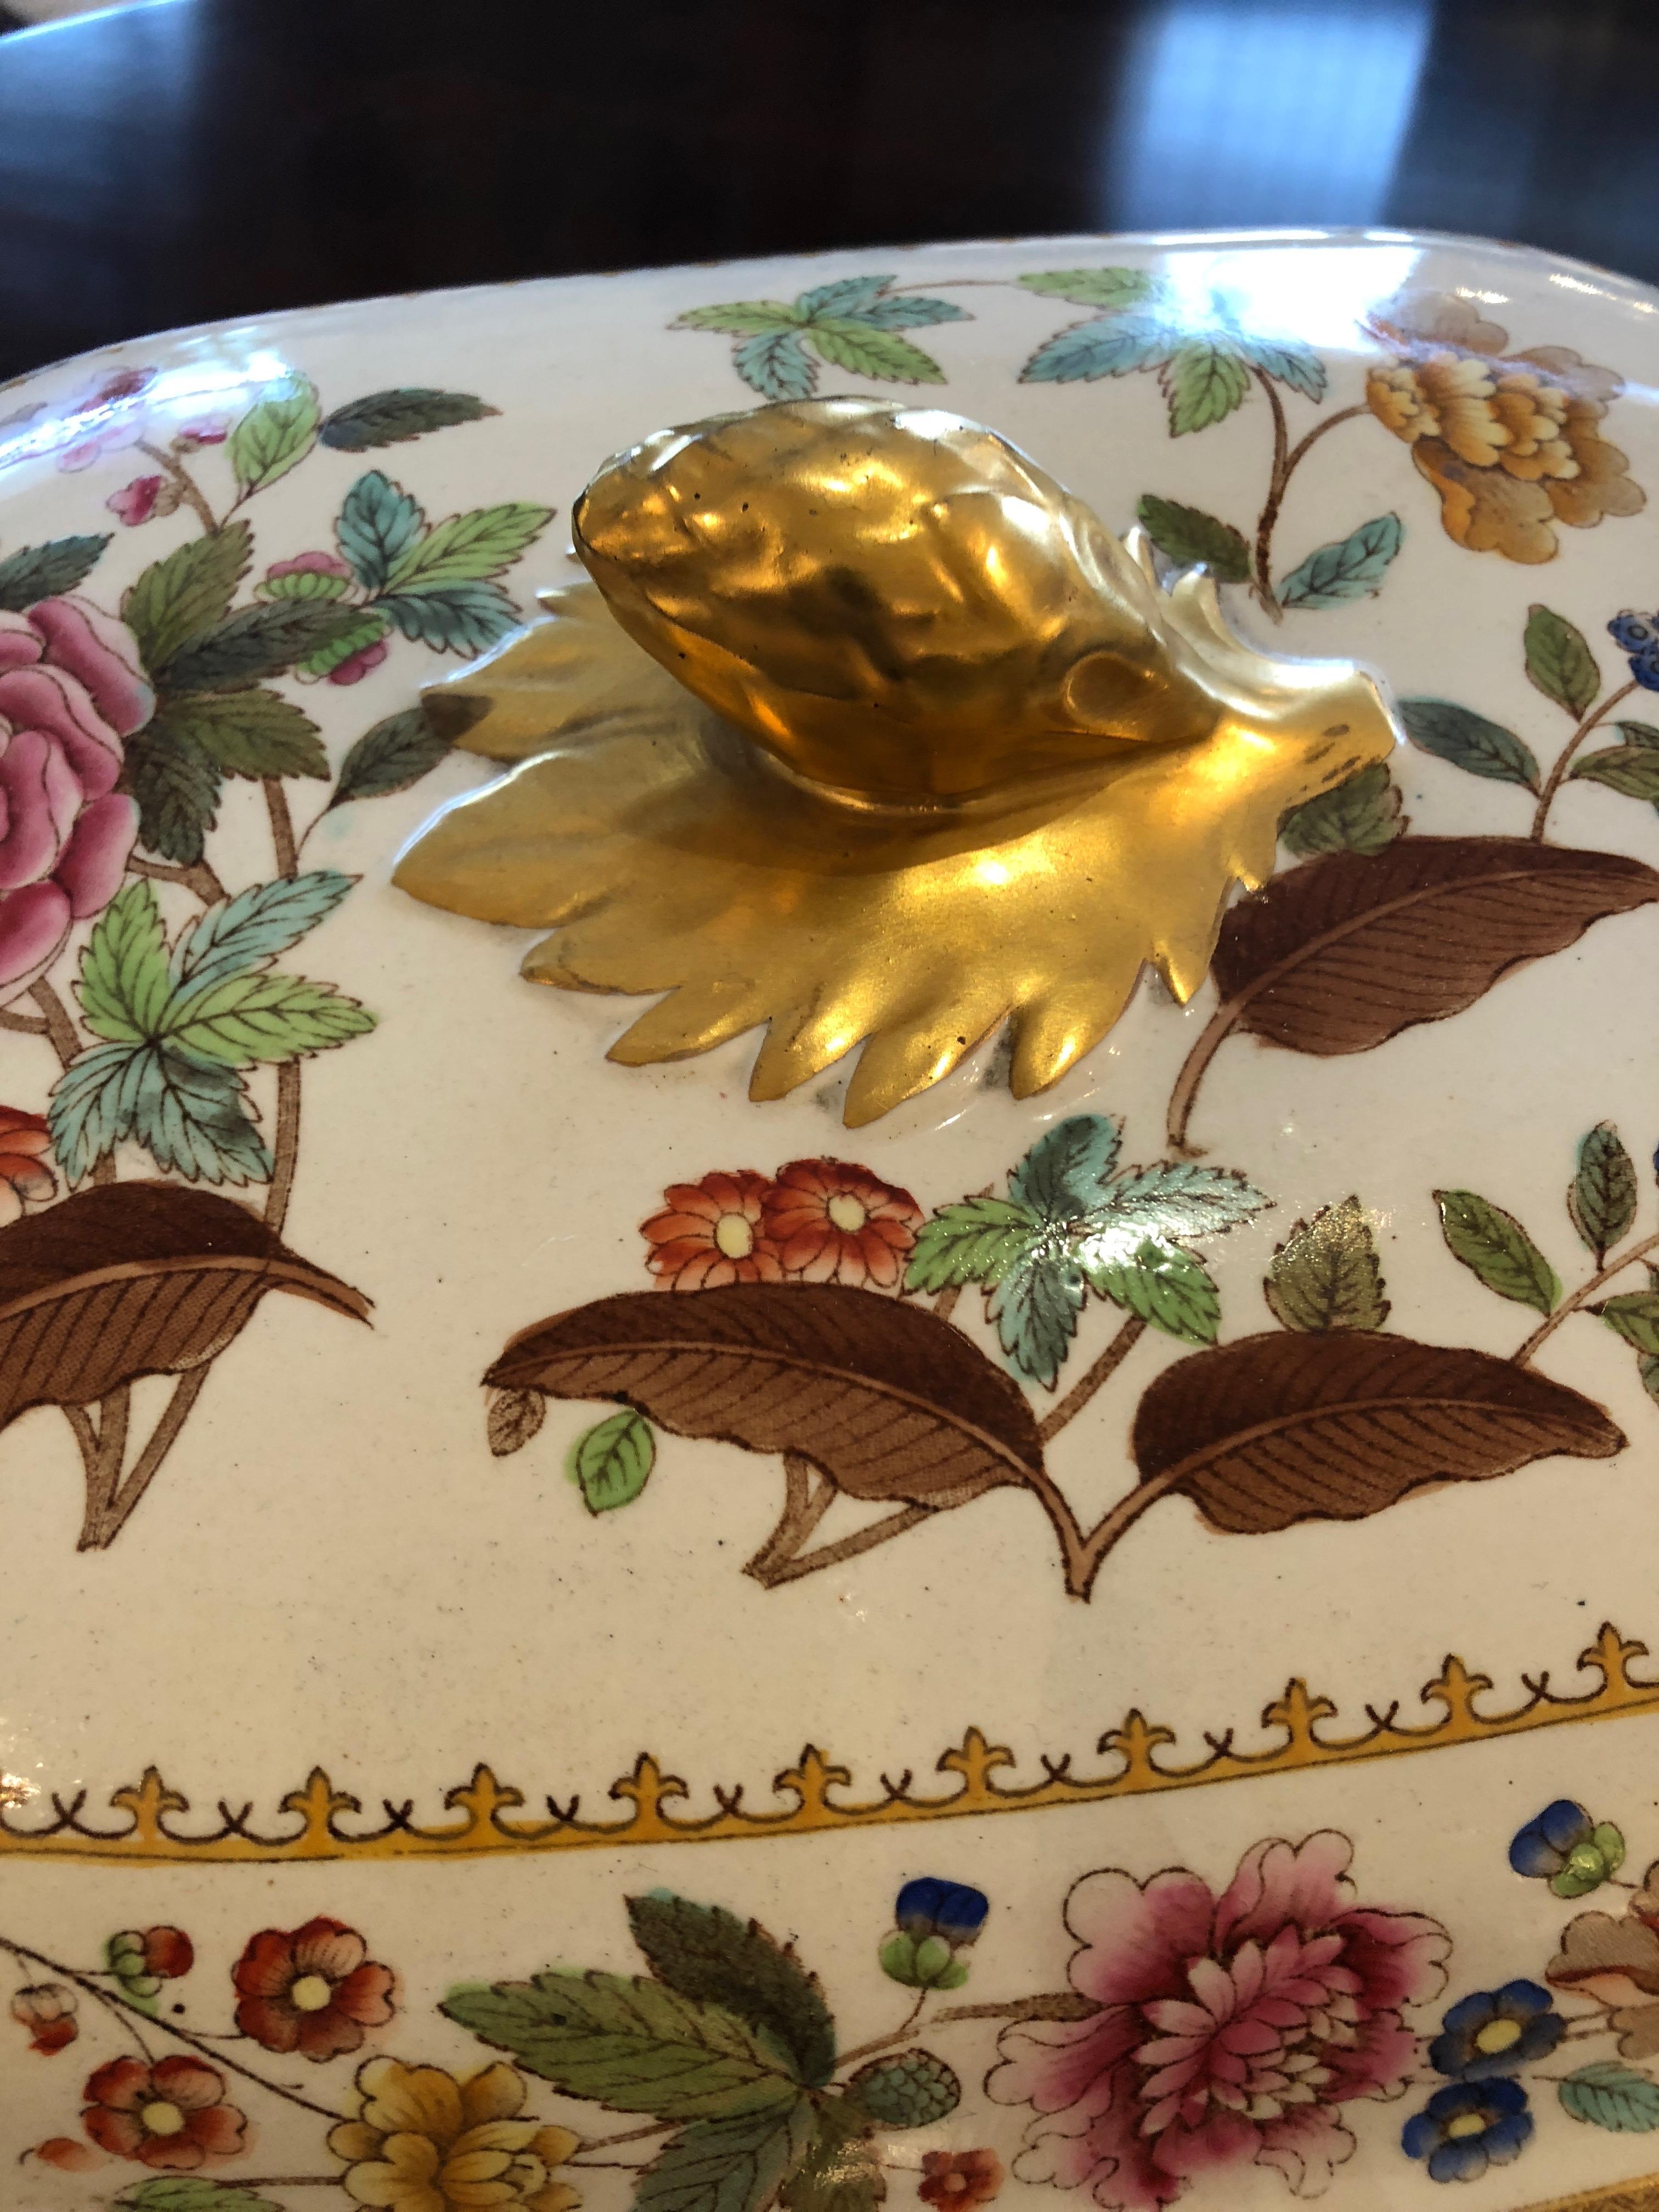 Gorgeous 19th century English porcelain soup tureen and underneath platter with floral and bird motif in gorgeous colors with gold leaf finial and handles, against a white background.
Measures: Tureen is 14 inches wide, 9.75 D, 8 H.

 